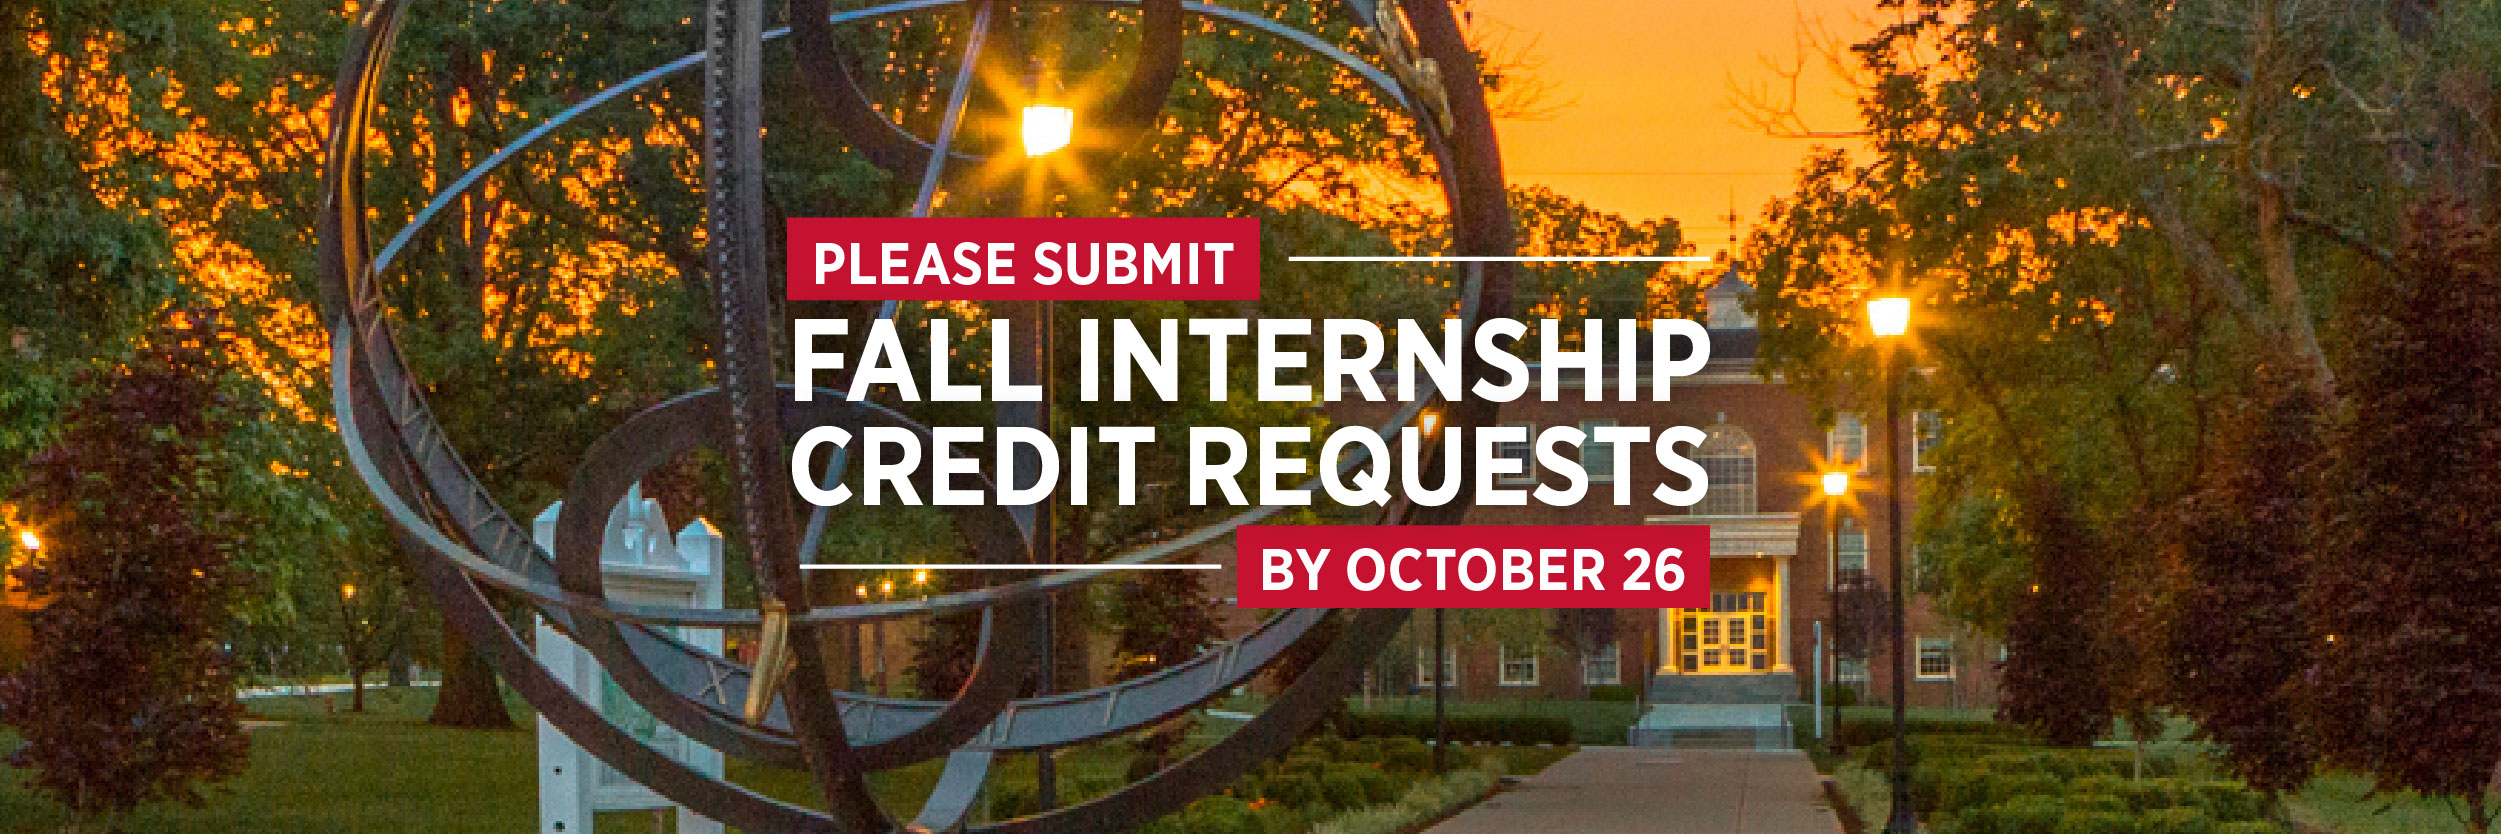  Please submit Fall Credit Internship Requests by October 26